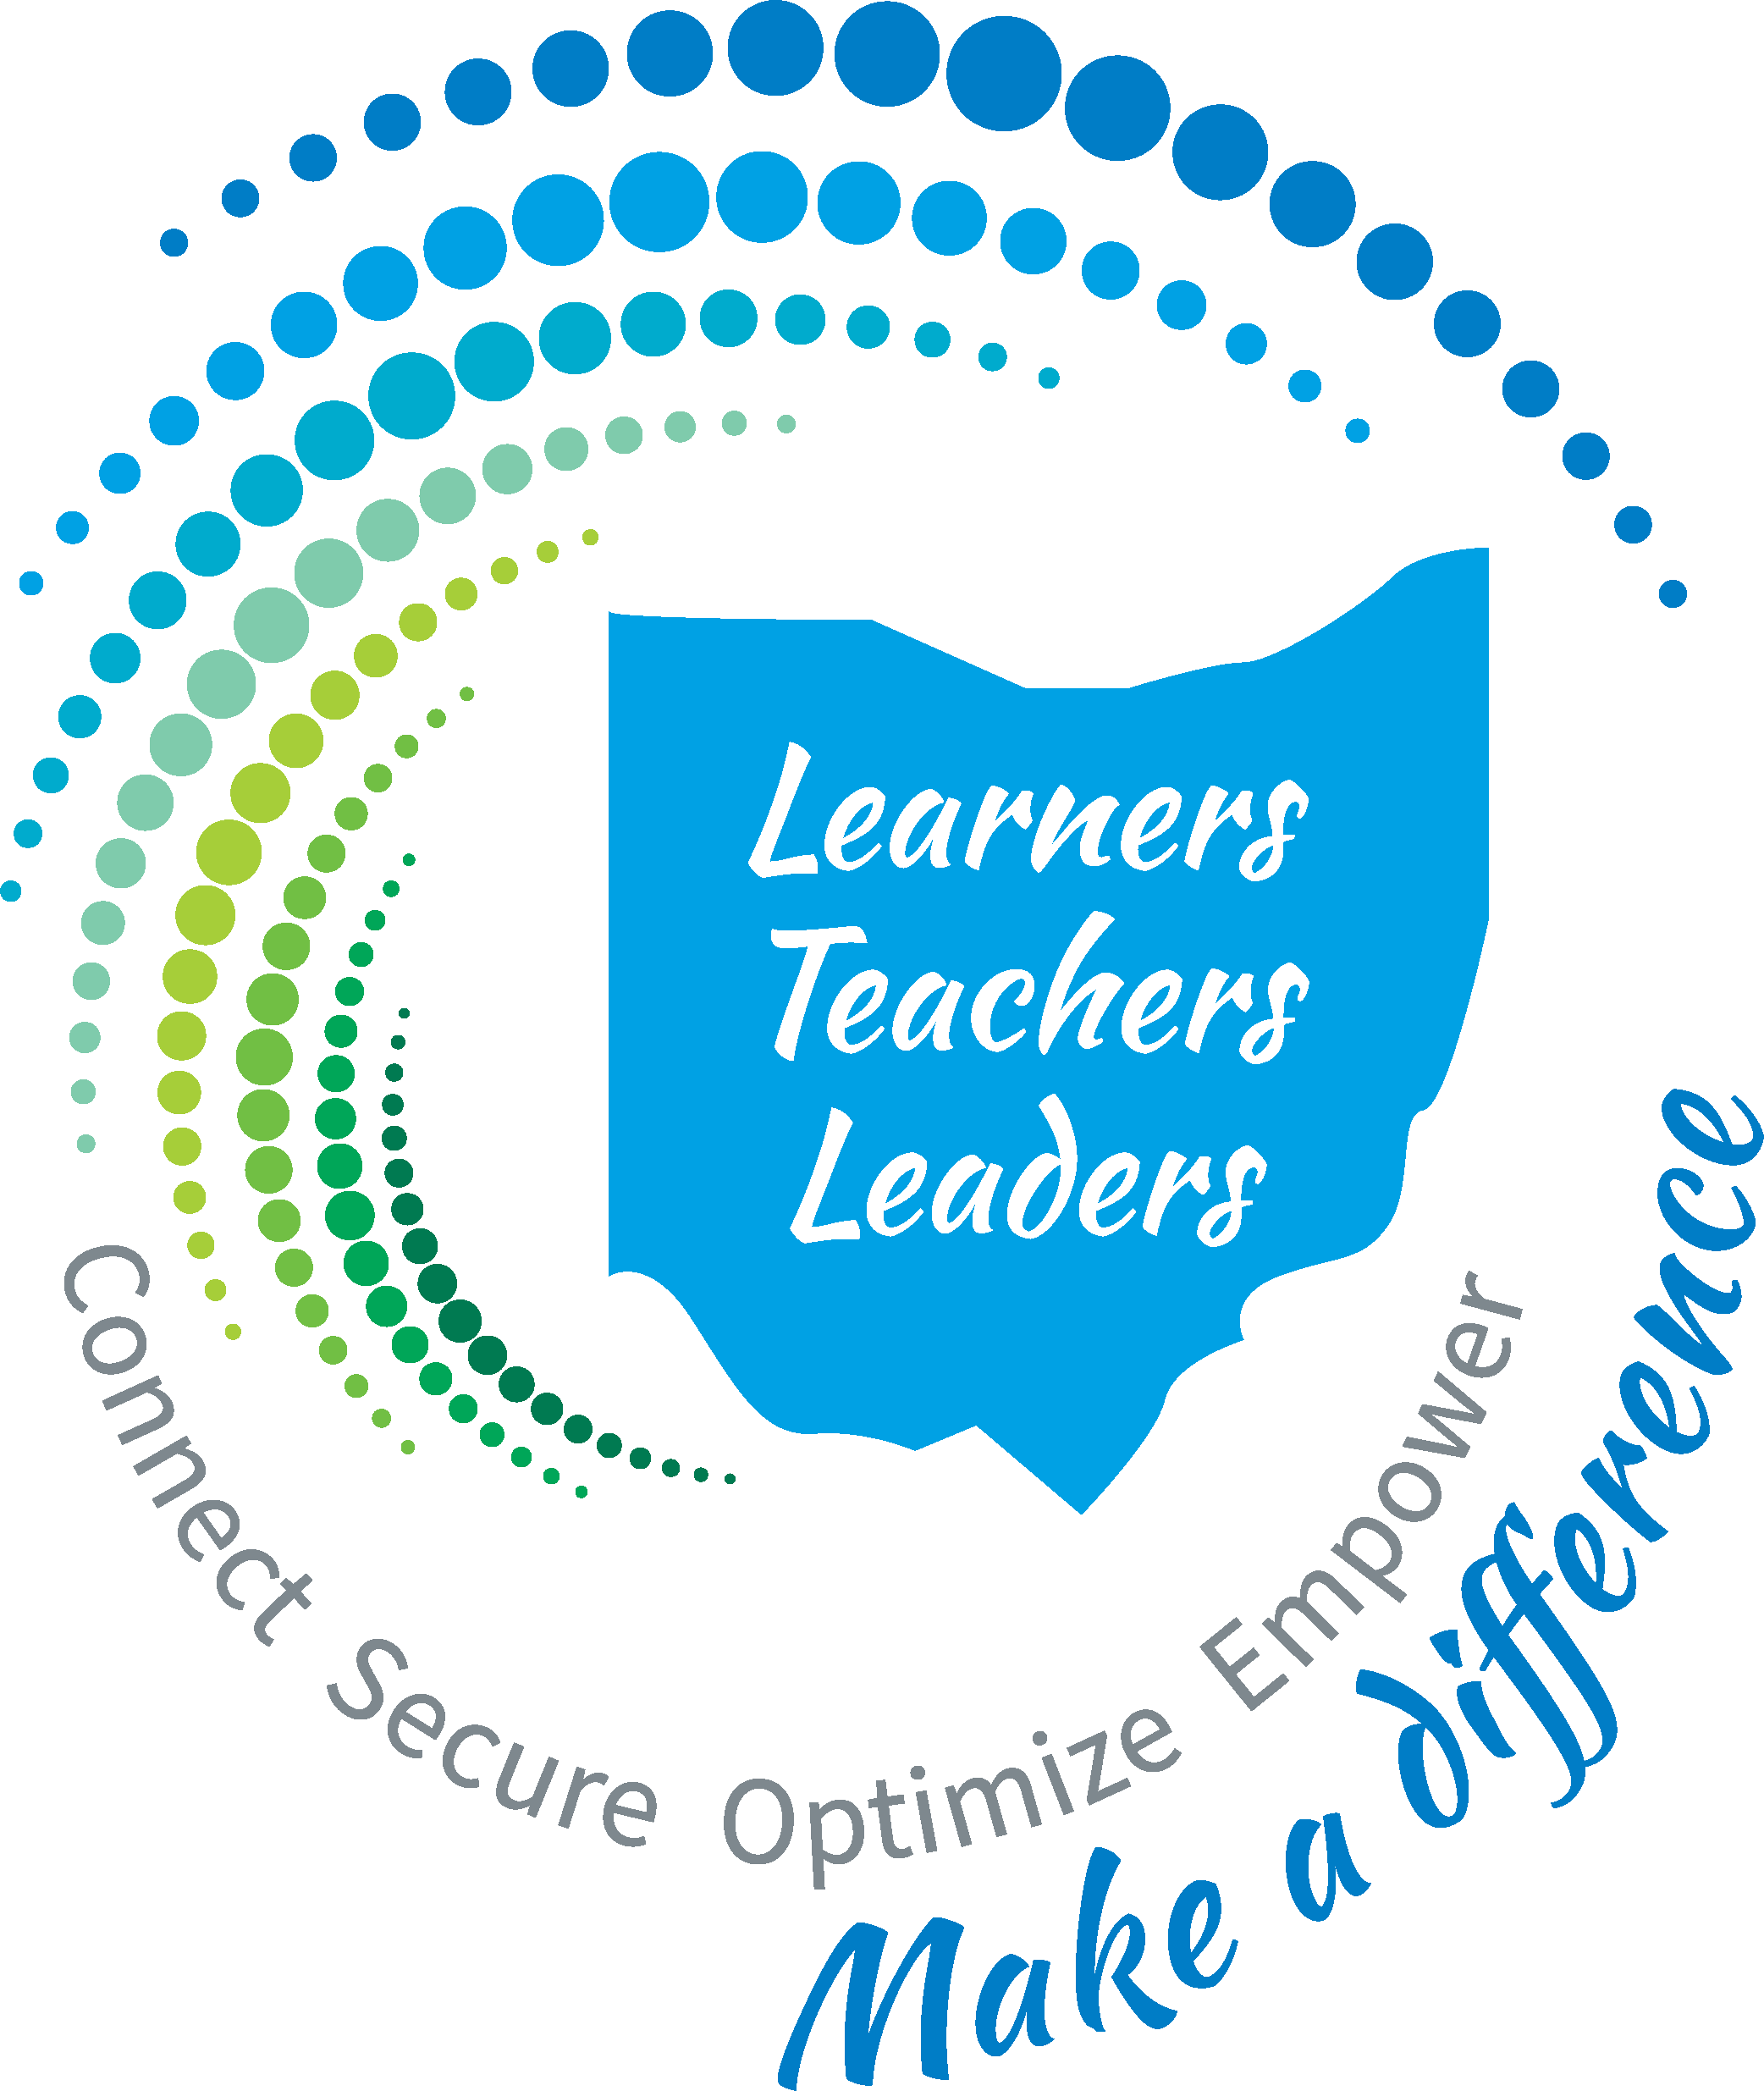 Public Resourcers to Support Remote Learning